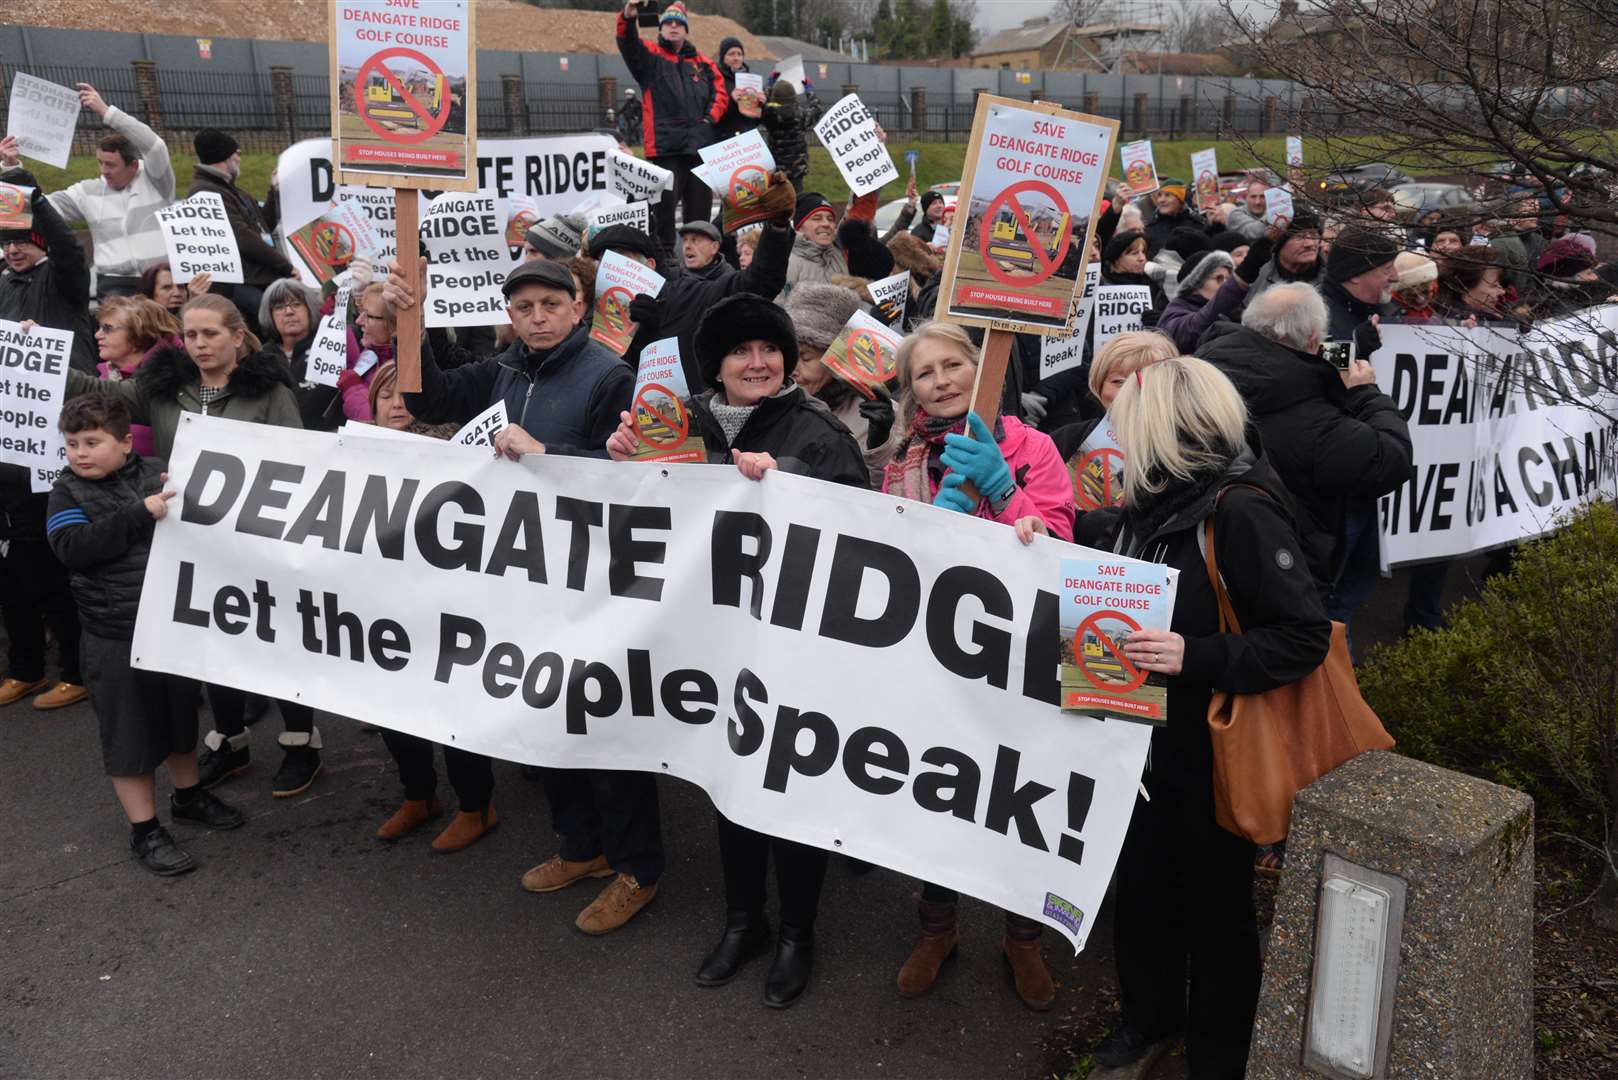 Protesters against the closure of Deangate Ridge Golf Course outside the Medway Council offices in Gun Wharf on Tuesday afternoon. Picture: Chris Davey (850239)